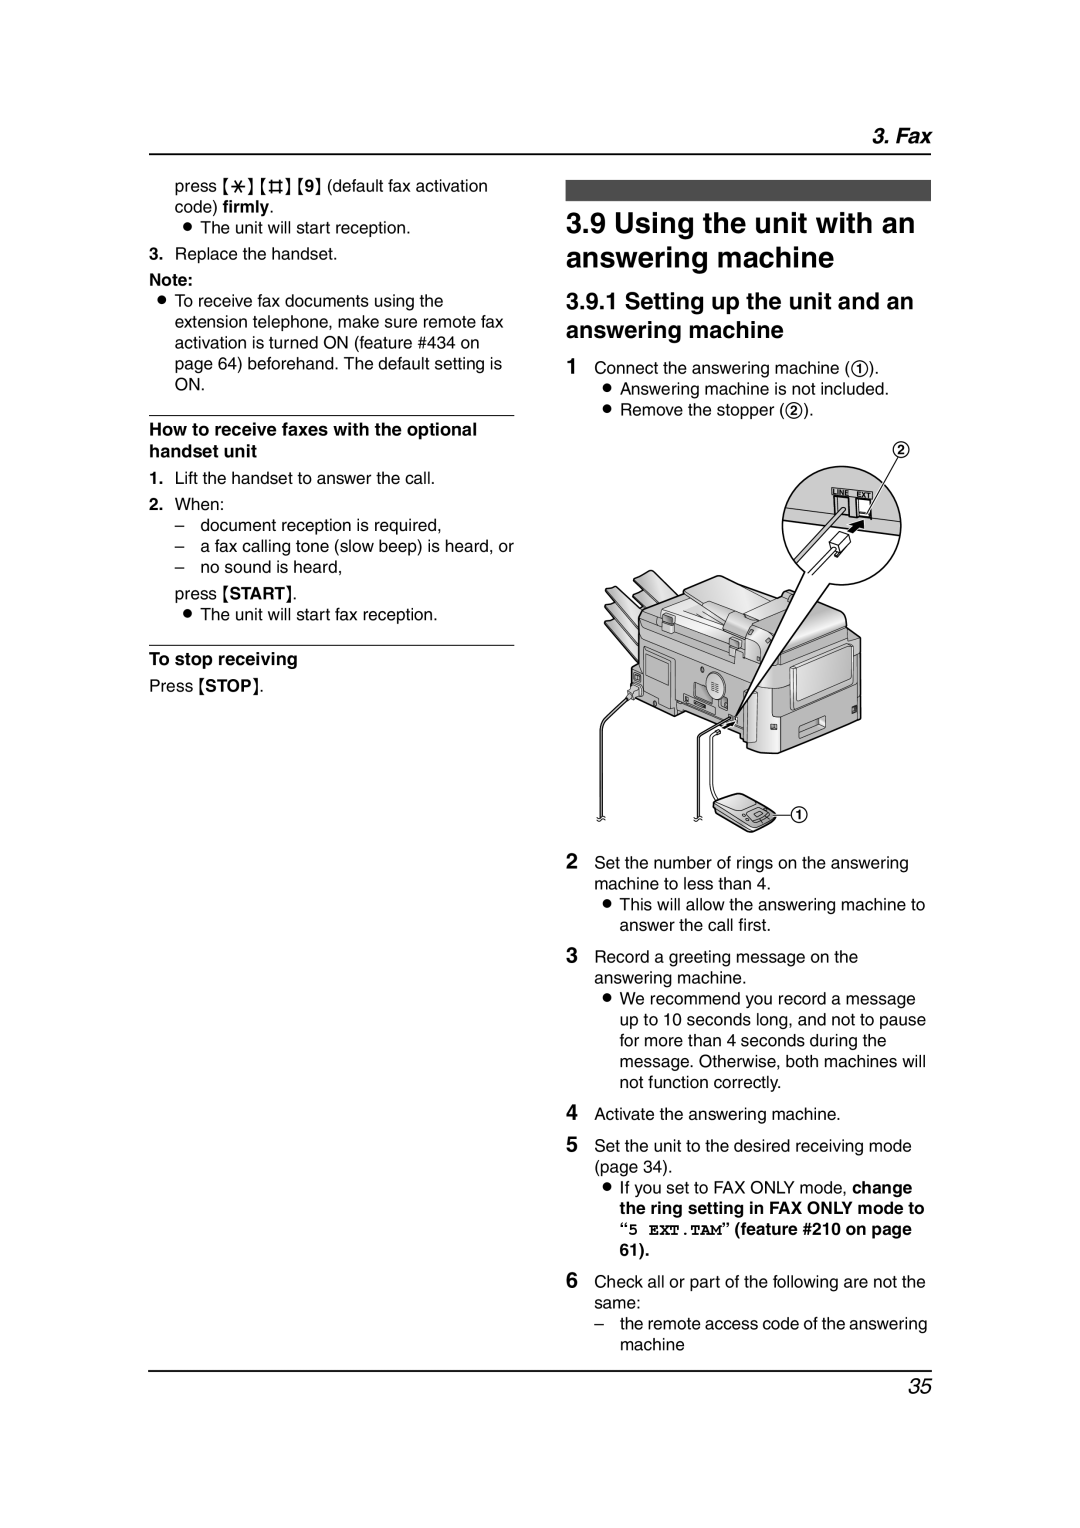 Panasonic KX-FLB851 manual Using the unit with an answering machine, Setting up the unit and an answering machine, Fax 